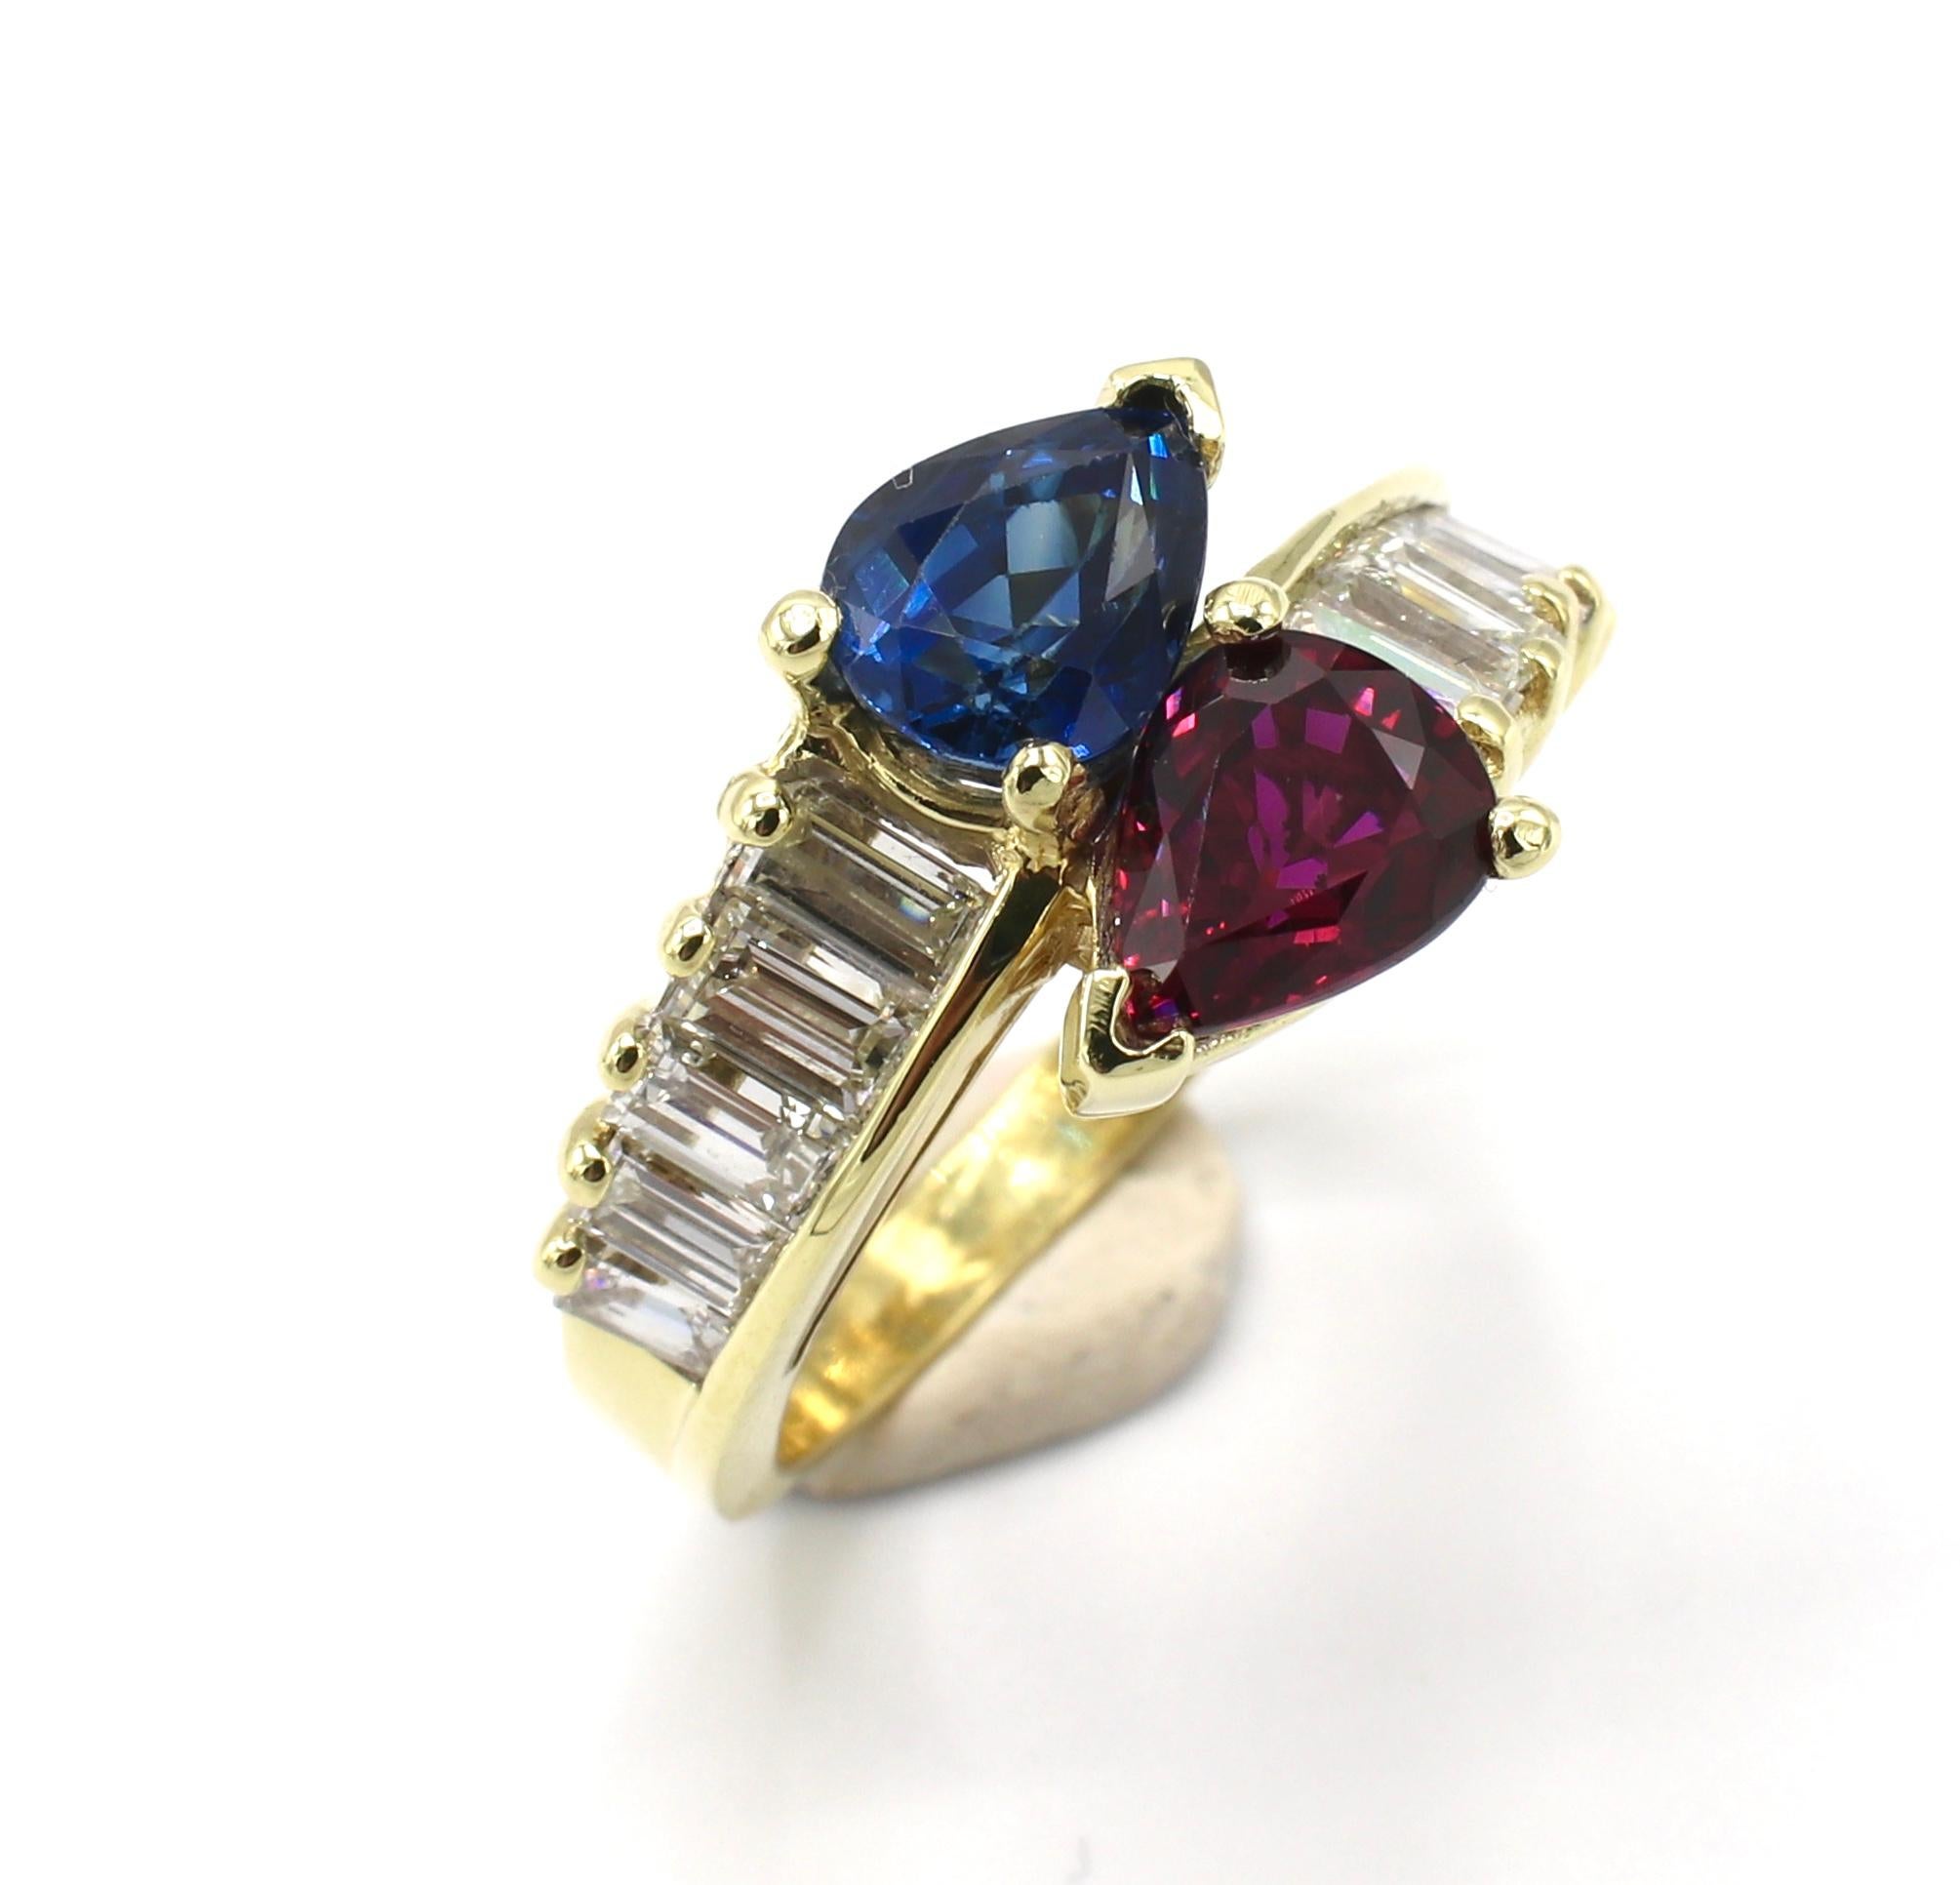 GIA Certified 18K Yellow Gold Diamond, Ruby & Blue Sapphire Bypass Ring Size 8 
GIA Report Numbers: 2215407435 & 2215407422 (please note original reports pictured for details)
Metal: 18k yellow gold
Weight: 7.20 grams
Ruby: 1.54 Carats 
Blue